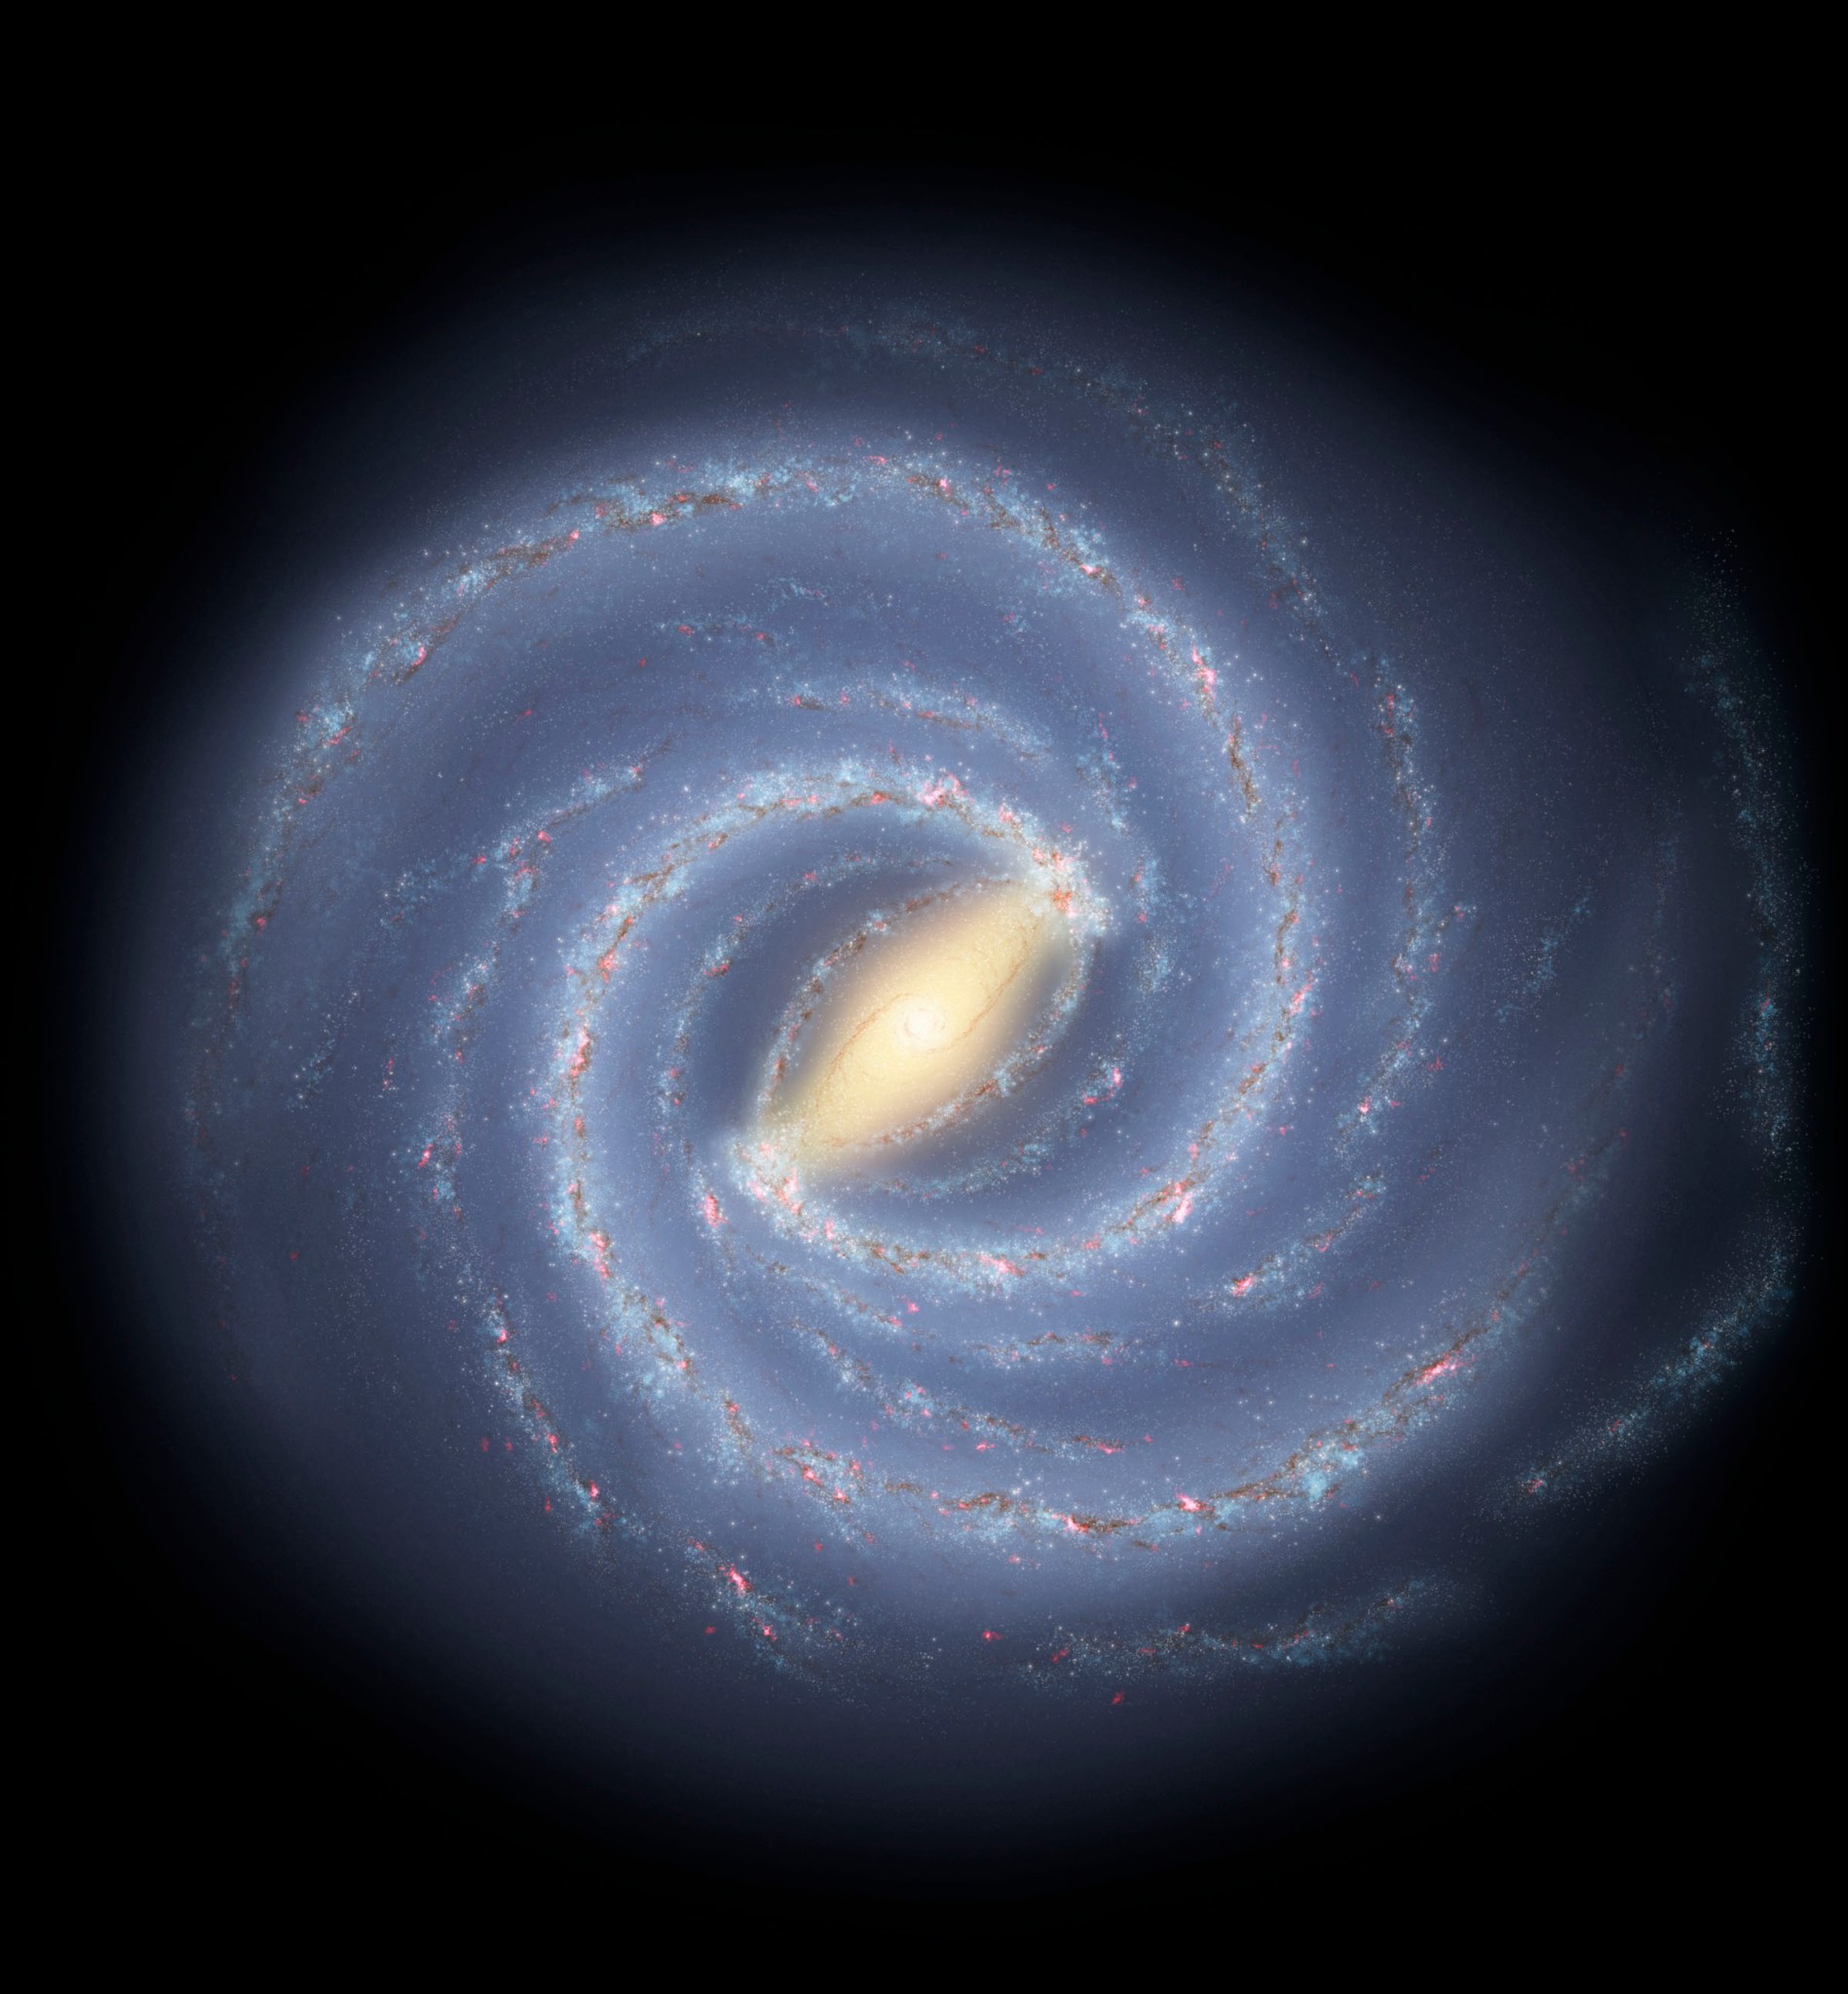 NASA has selected a new gamma-ray space telescope, the Compton Spectrometer and Imager (COSI), that will chart the evolution of the Milky Way, seen here in this illustration.